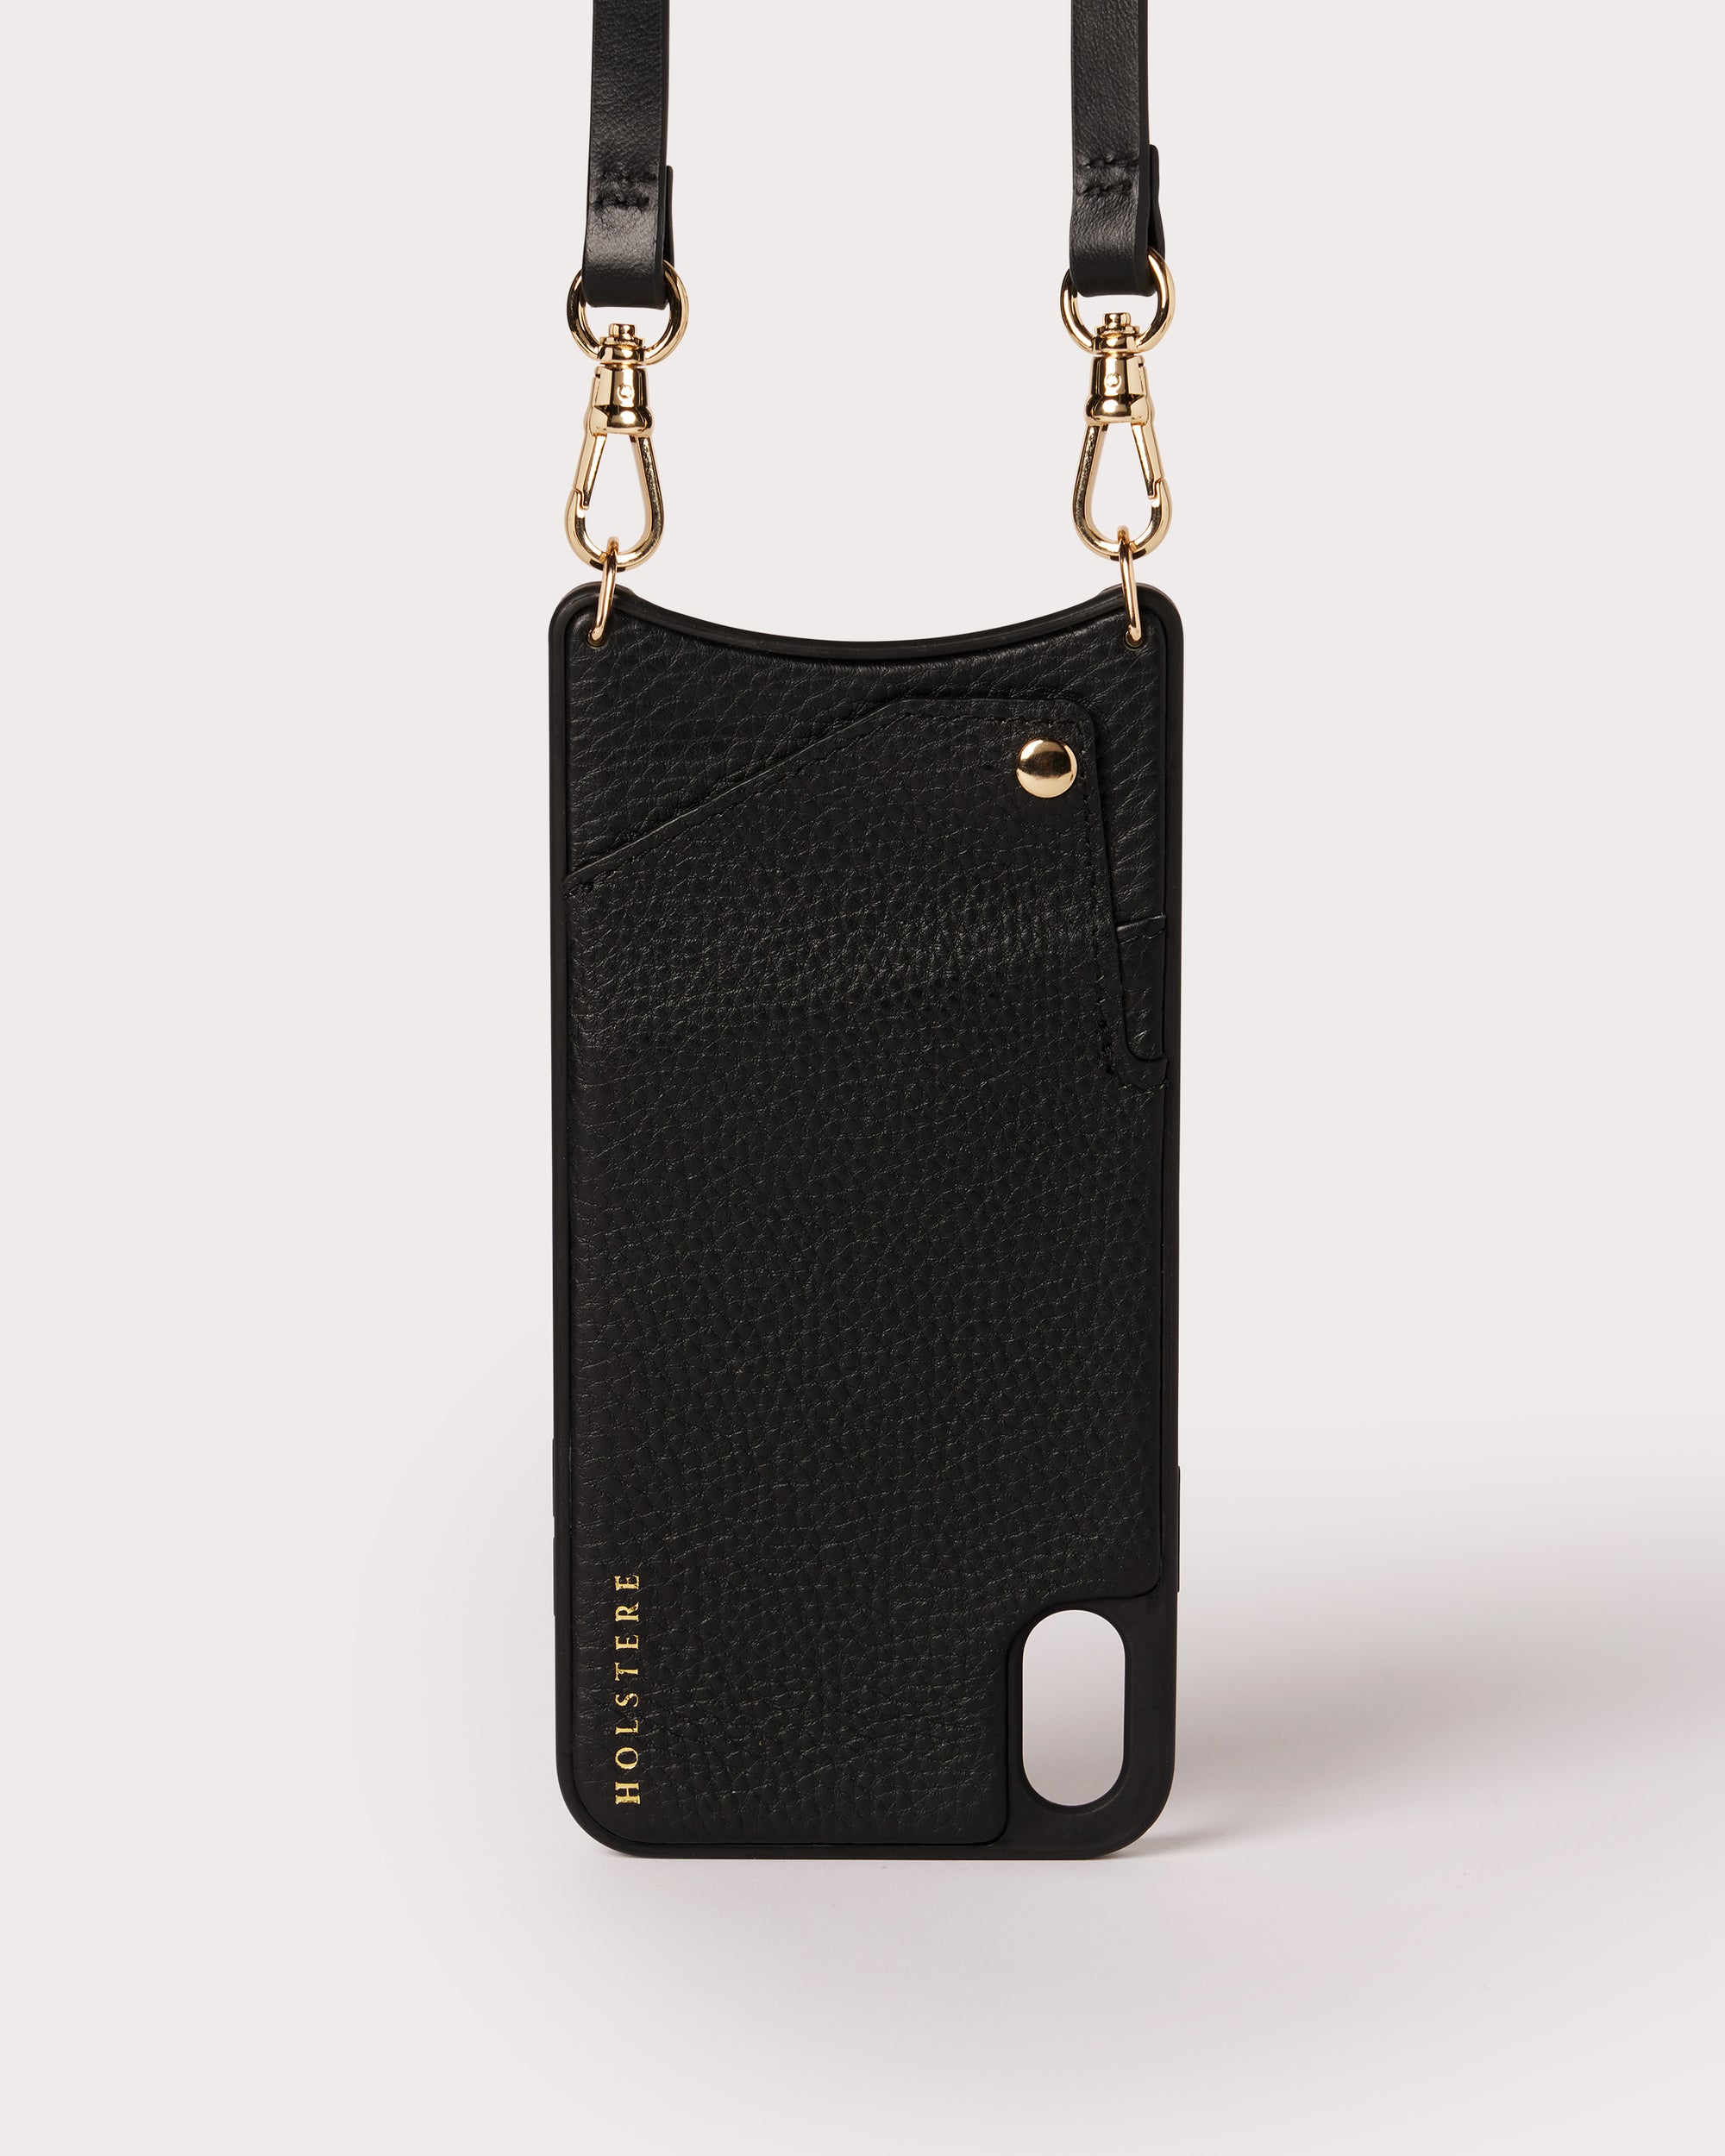 Holstere Genuine Leather iPhone Case Crossbody Phone Purse Cross Body Holster Clip for Easy Carry Hands Free - Real Black Pebbled Leather Snap In Phone Case with Wallet Credit Card ID Sleeve and Snap Shut Button  - 3 Strap Options: Chain, Plain Adjustable Length Leather, or Black Leather with Gold Studs.  iPhone Leash for iPhone 6, 6s, SE, 7, 8, 6 Plus, 7 Plus, 8 Plus, X, 10, XS, XR, XS Max